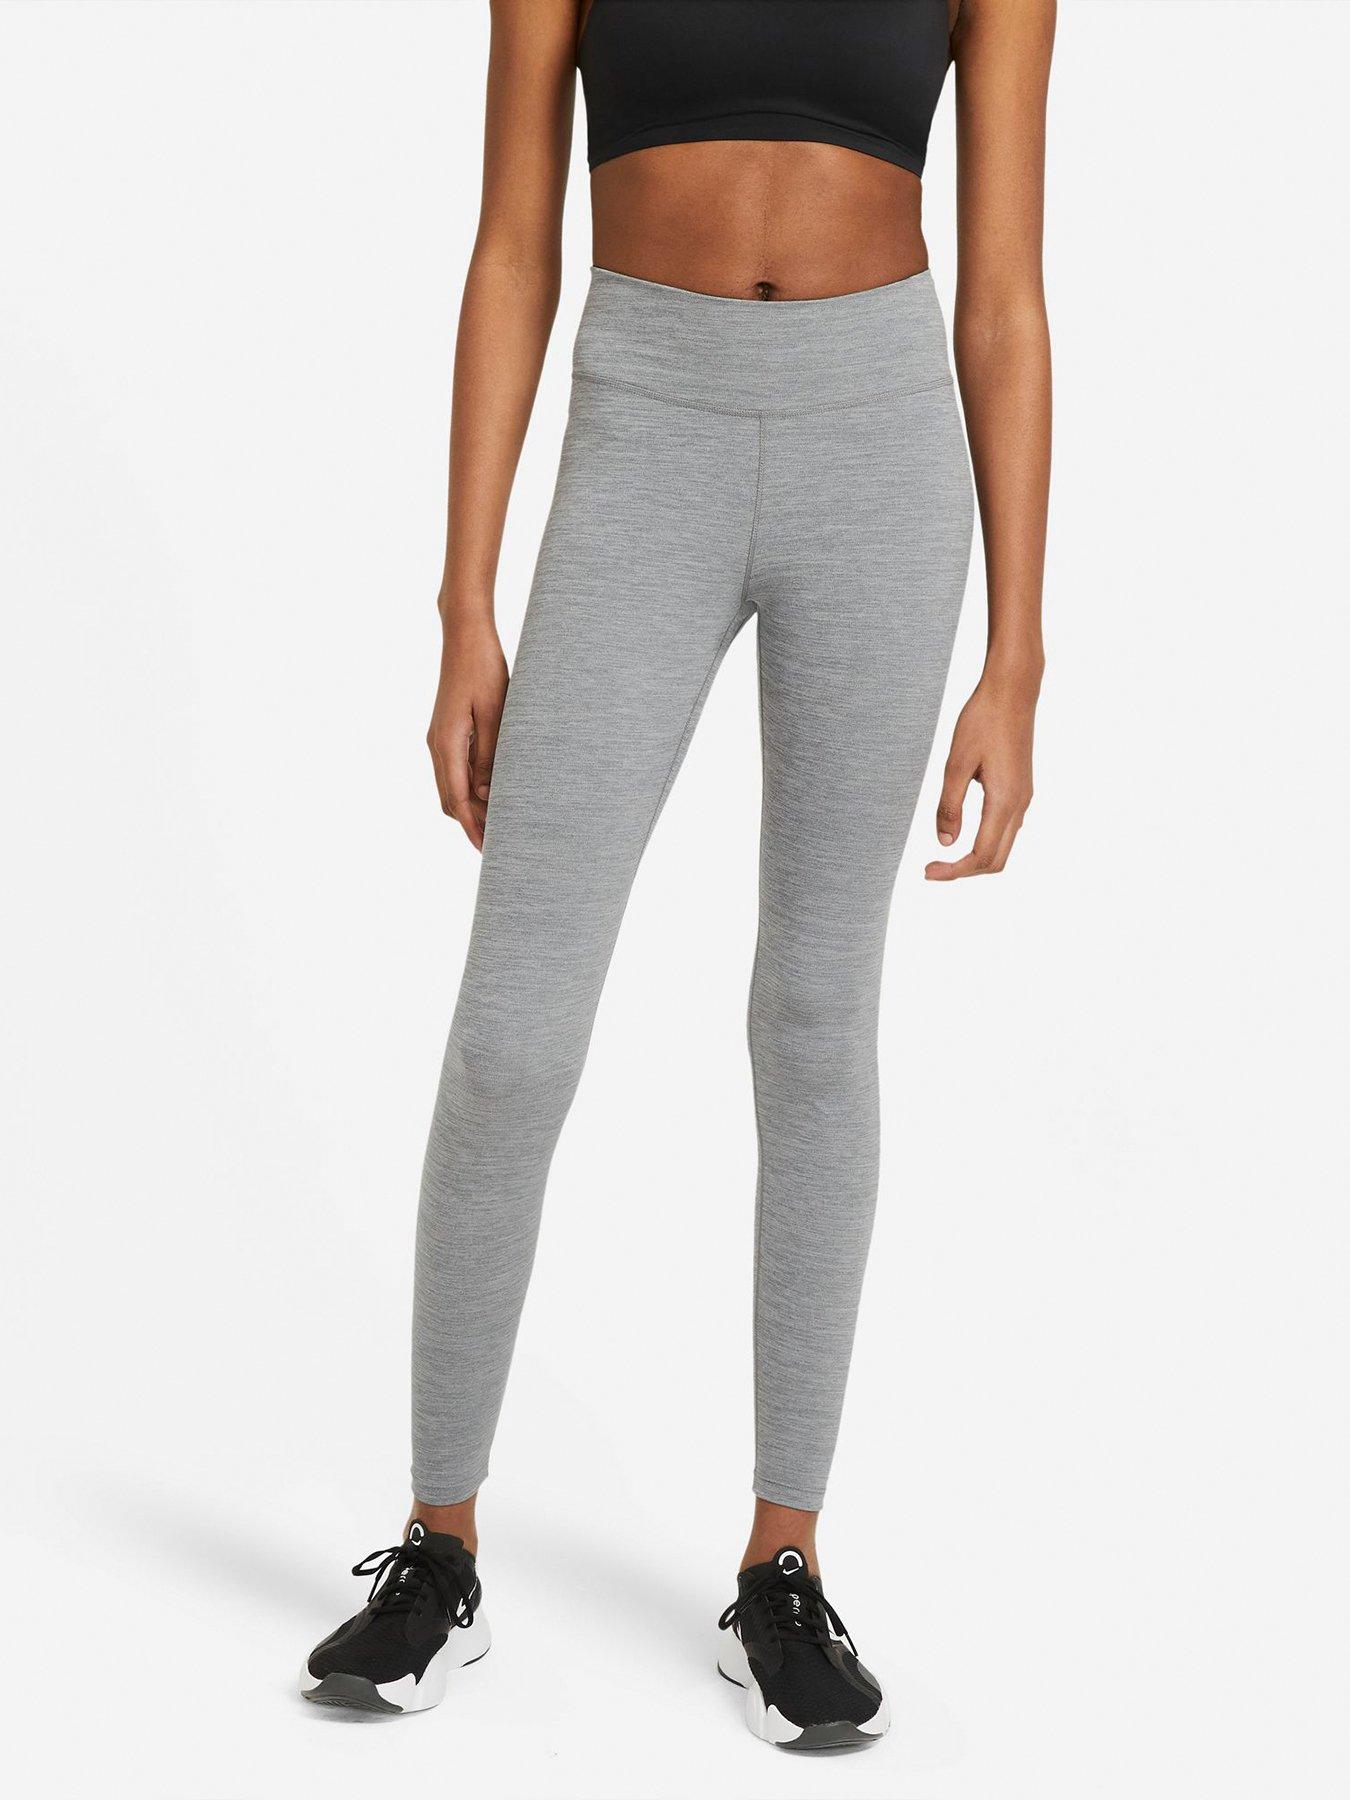 Authentic) Nike Dri-FIT Women's Fast Mid-Rise Crop Running Leggings Tight  Fit Black XL, Women's Fashion, Activewear on Carousell